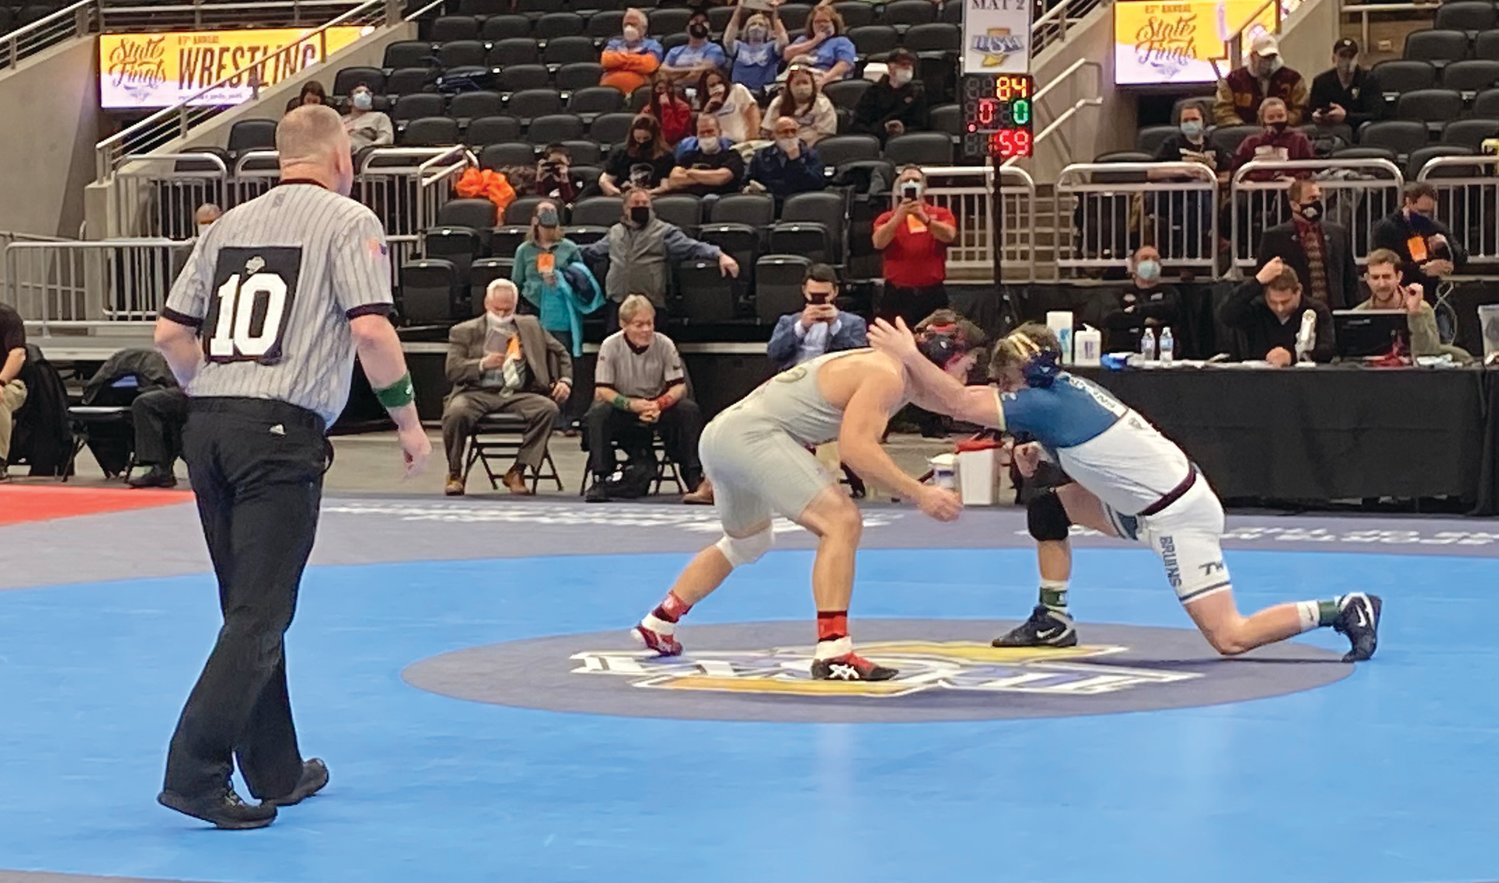 Southmont's Riley Woodall competes against Tri-West's Dominic Pugliese in the opening round of the state finals on Friday night at Bankers Life Fieldhouse.